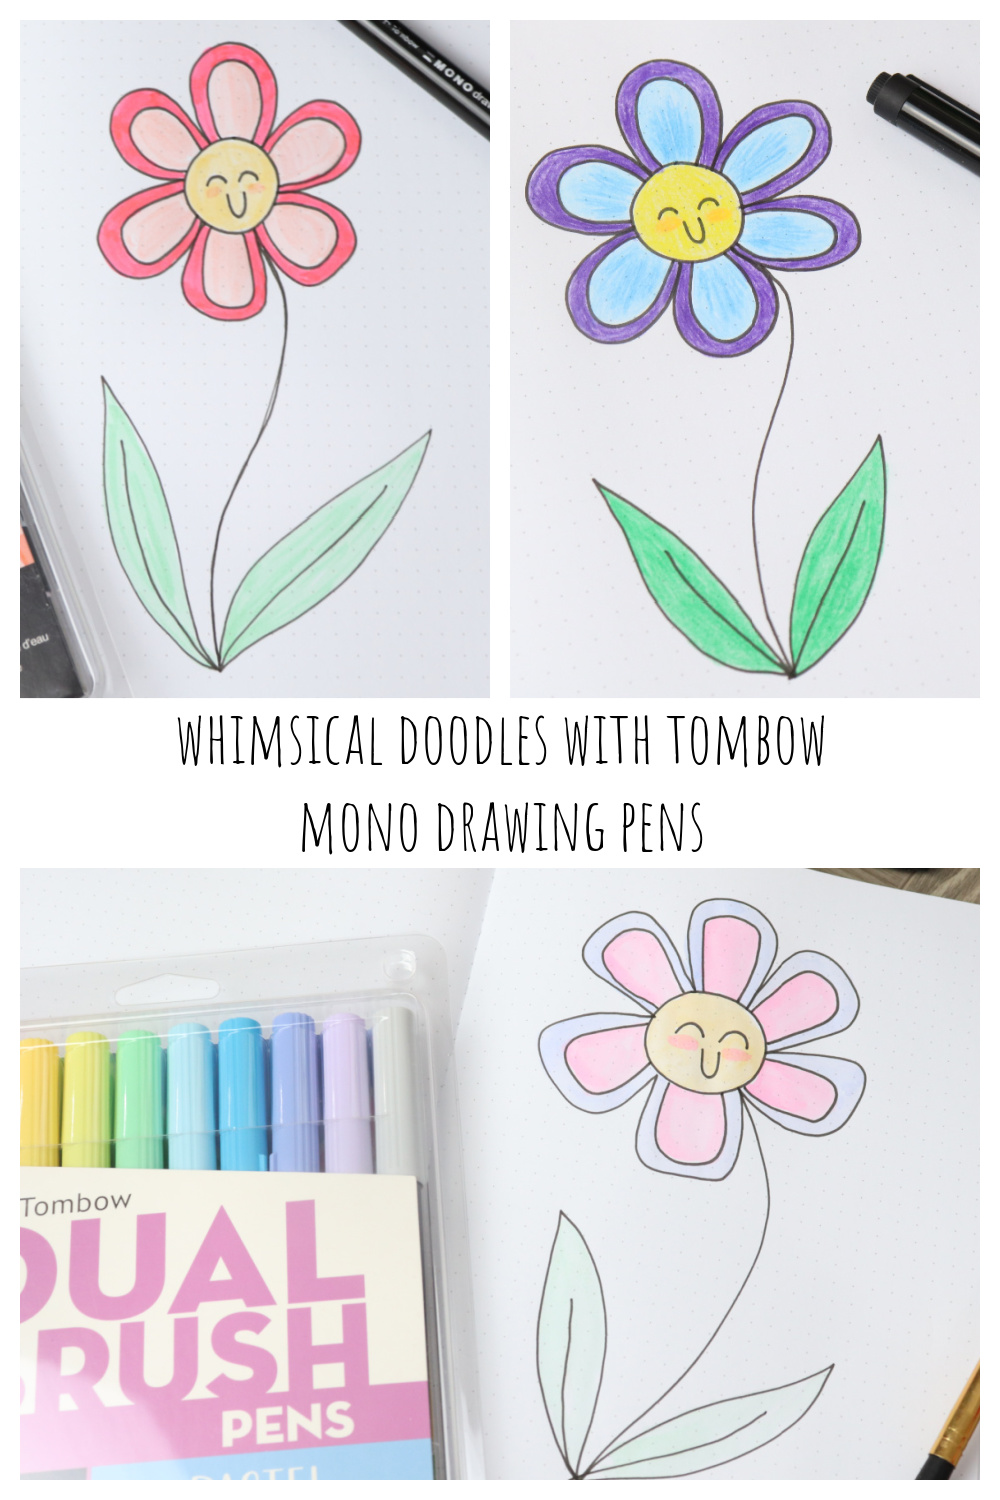 Image contains a collage of hand drawn flowers with smiling faces, colored in a variety of ways. The title “Whimsical Doodles with Tombow MONO Drawing Pens” stretches across the center.